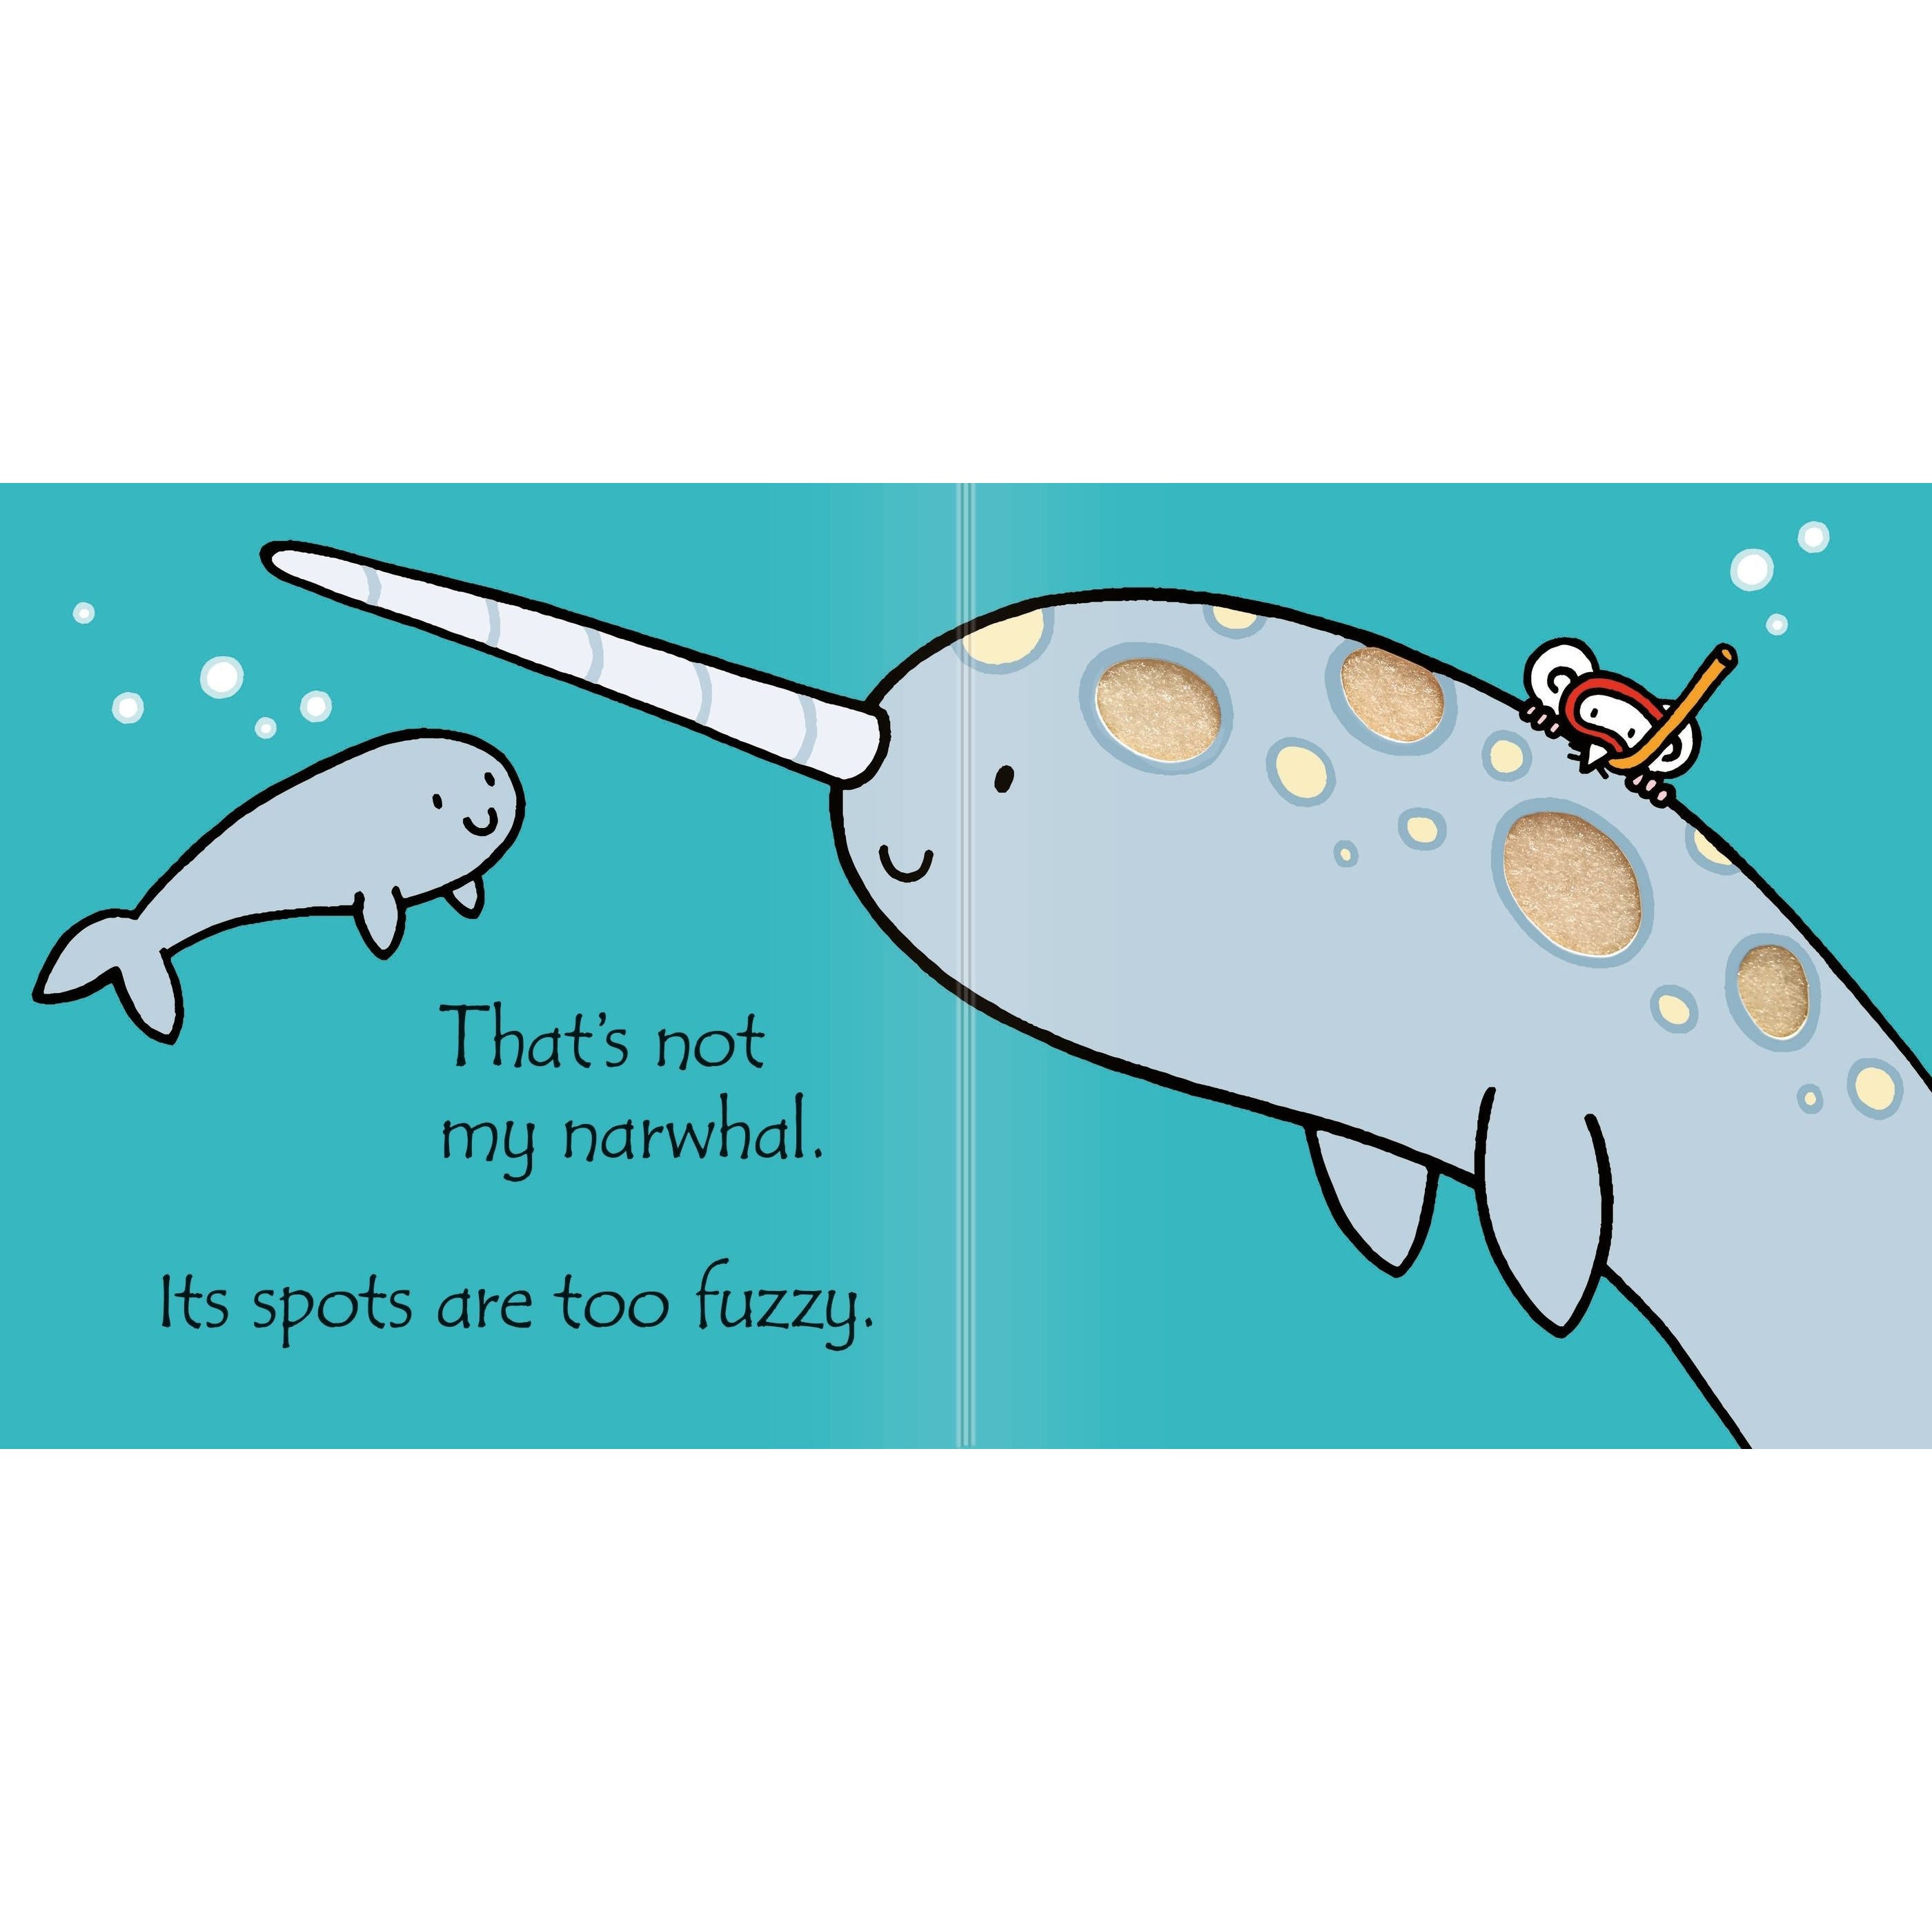 That's not my narwhal...